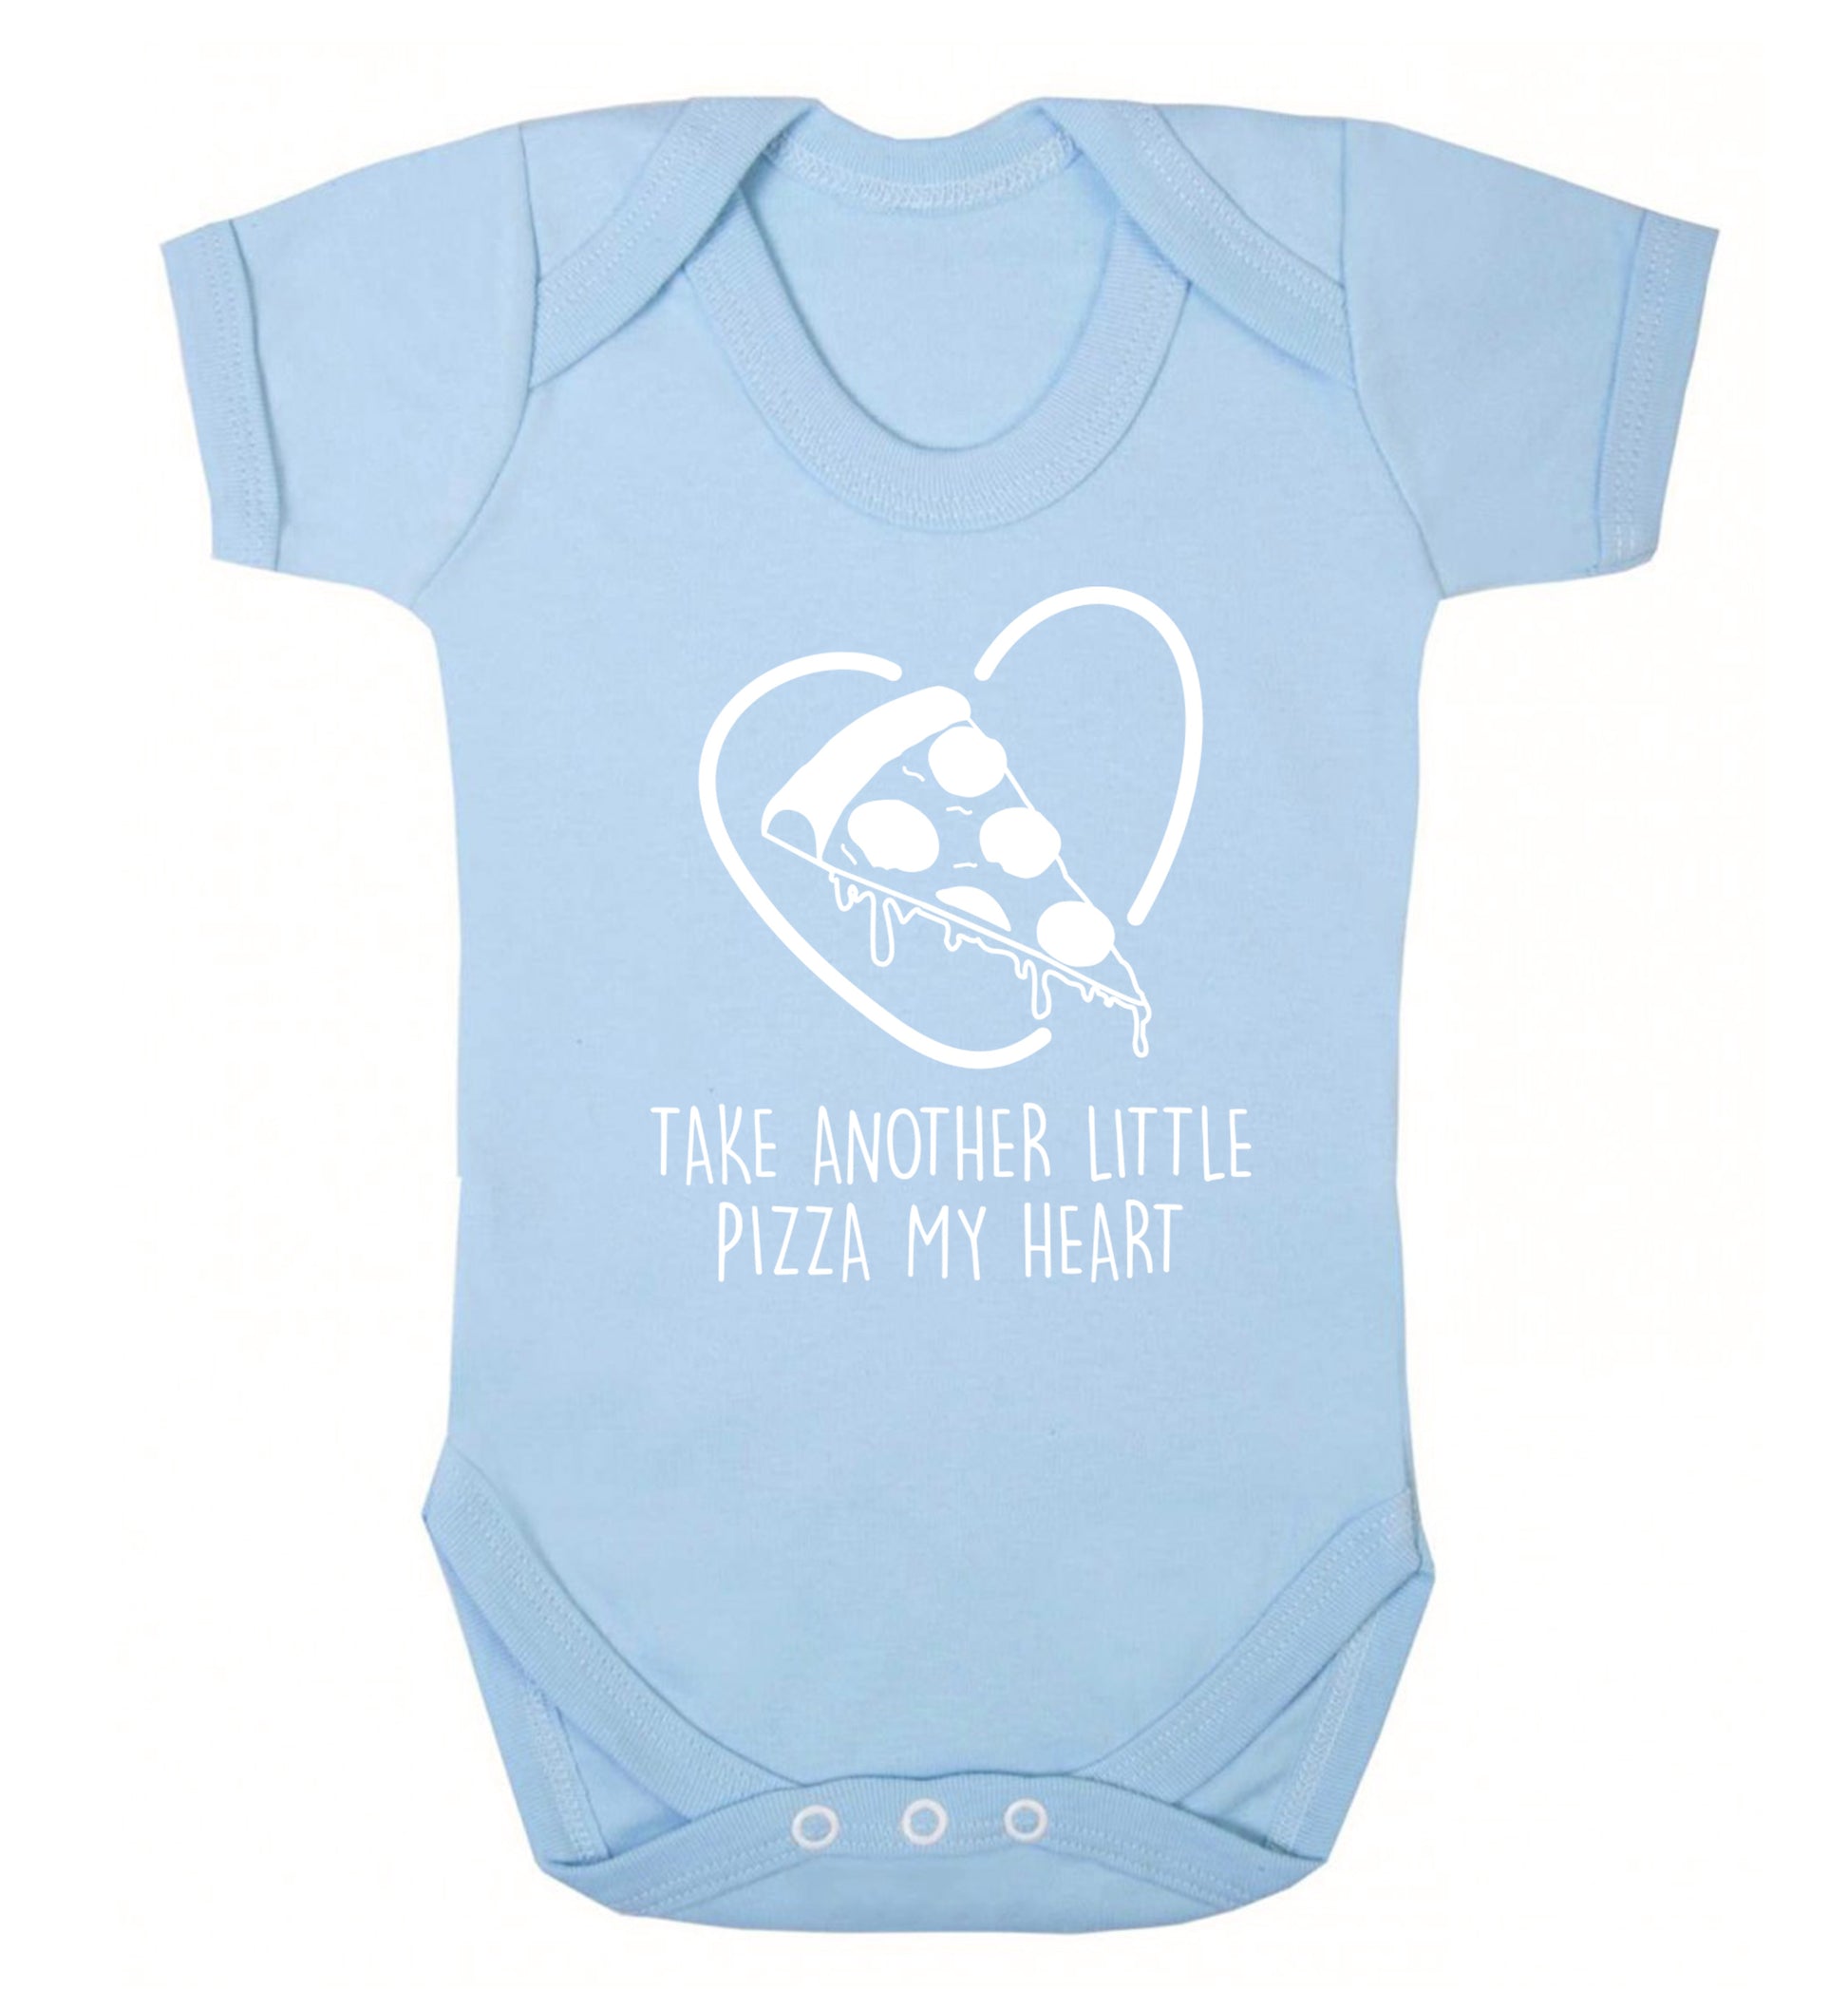 Take another little pizza my heart Baby Vest pale blue 18-24 months